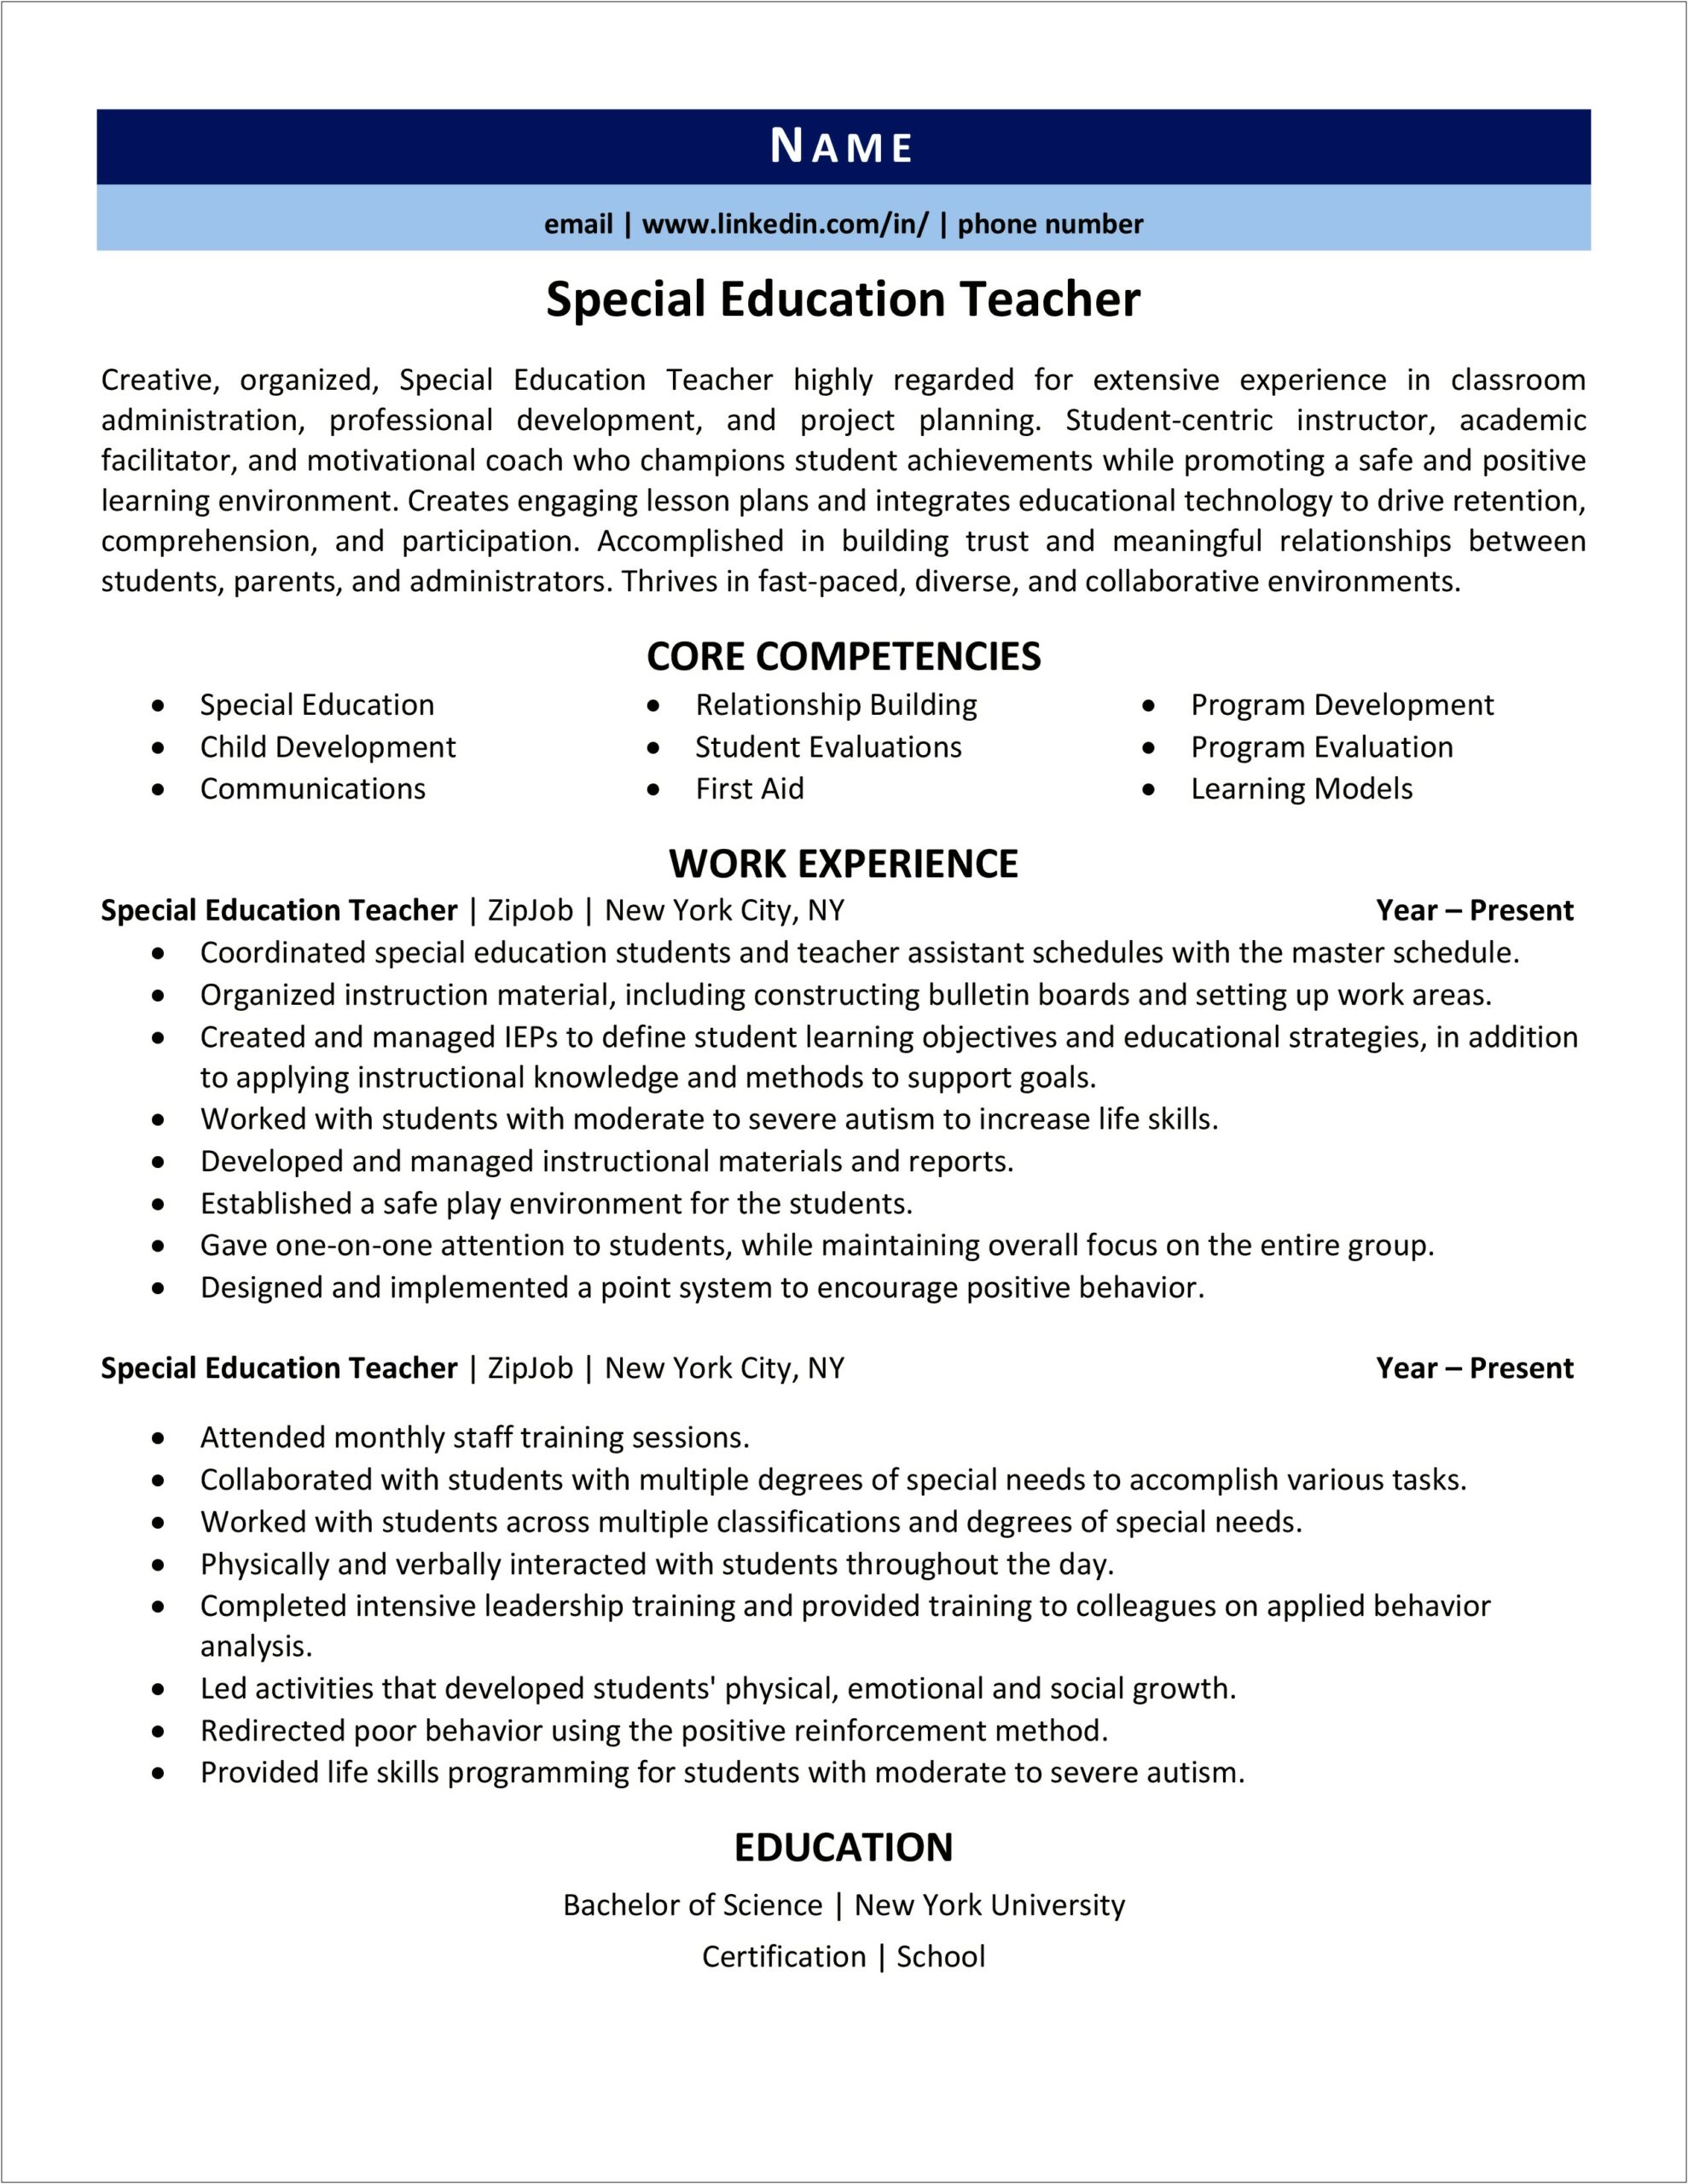 Lesson Plan Writing Resume Objective Statement